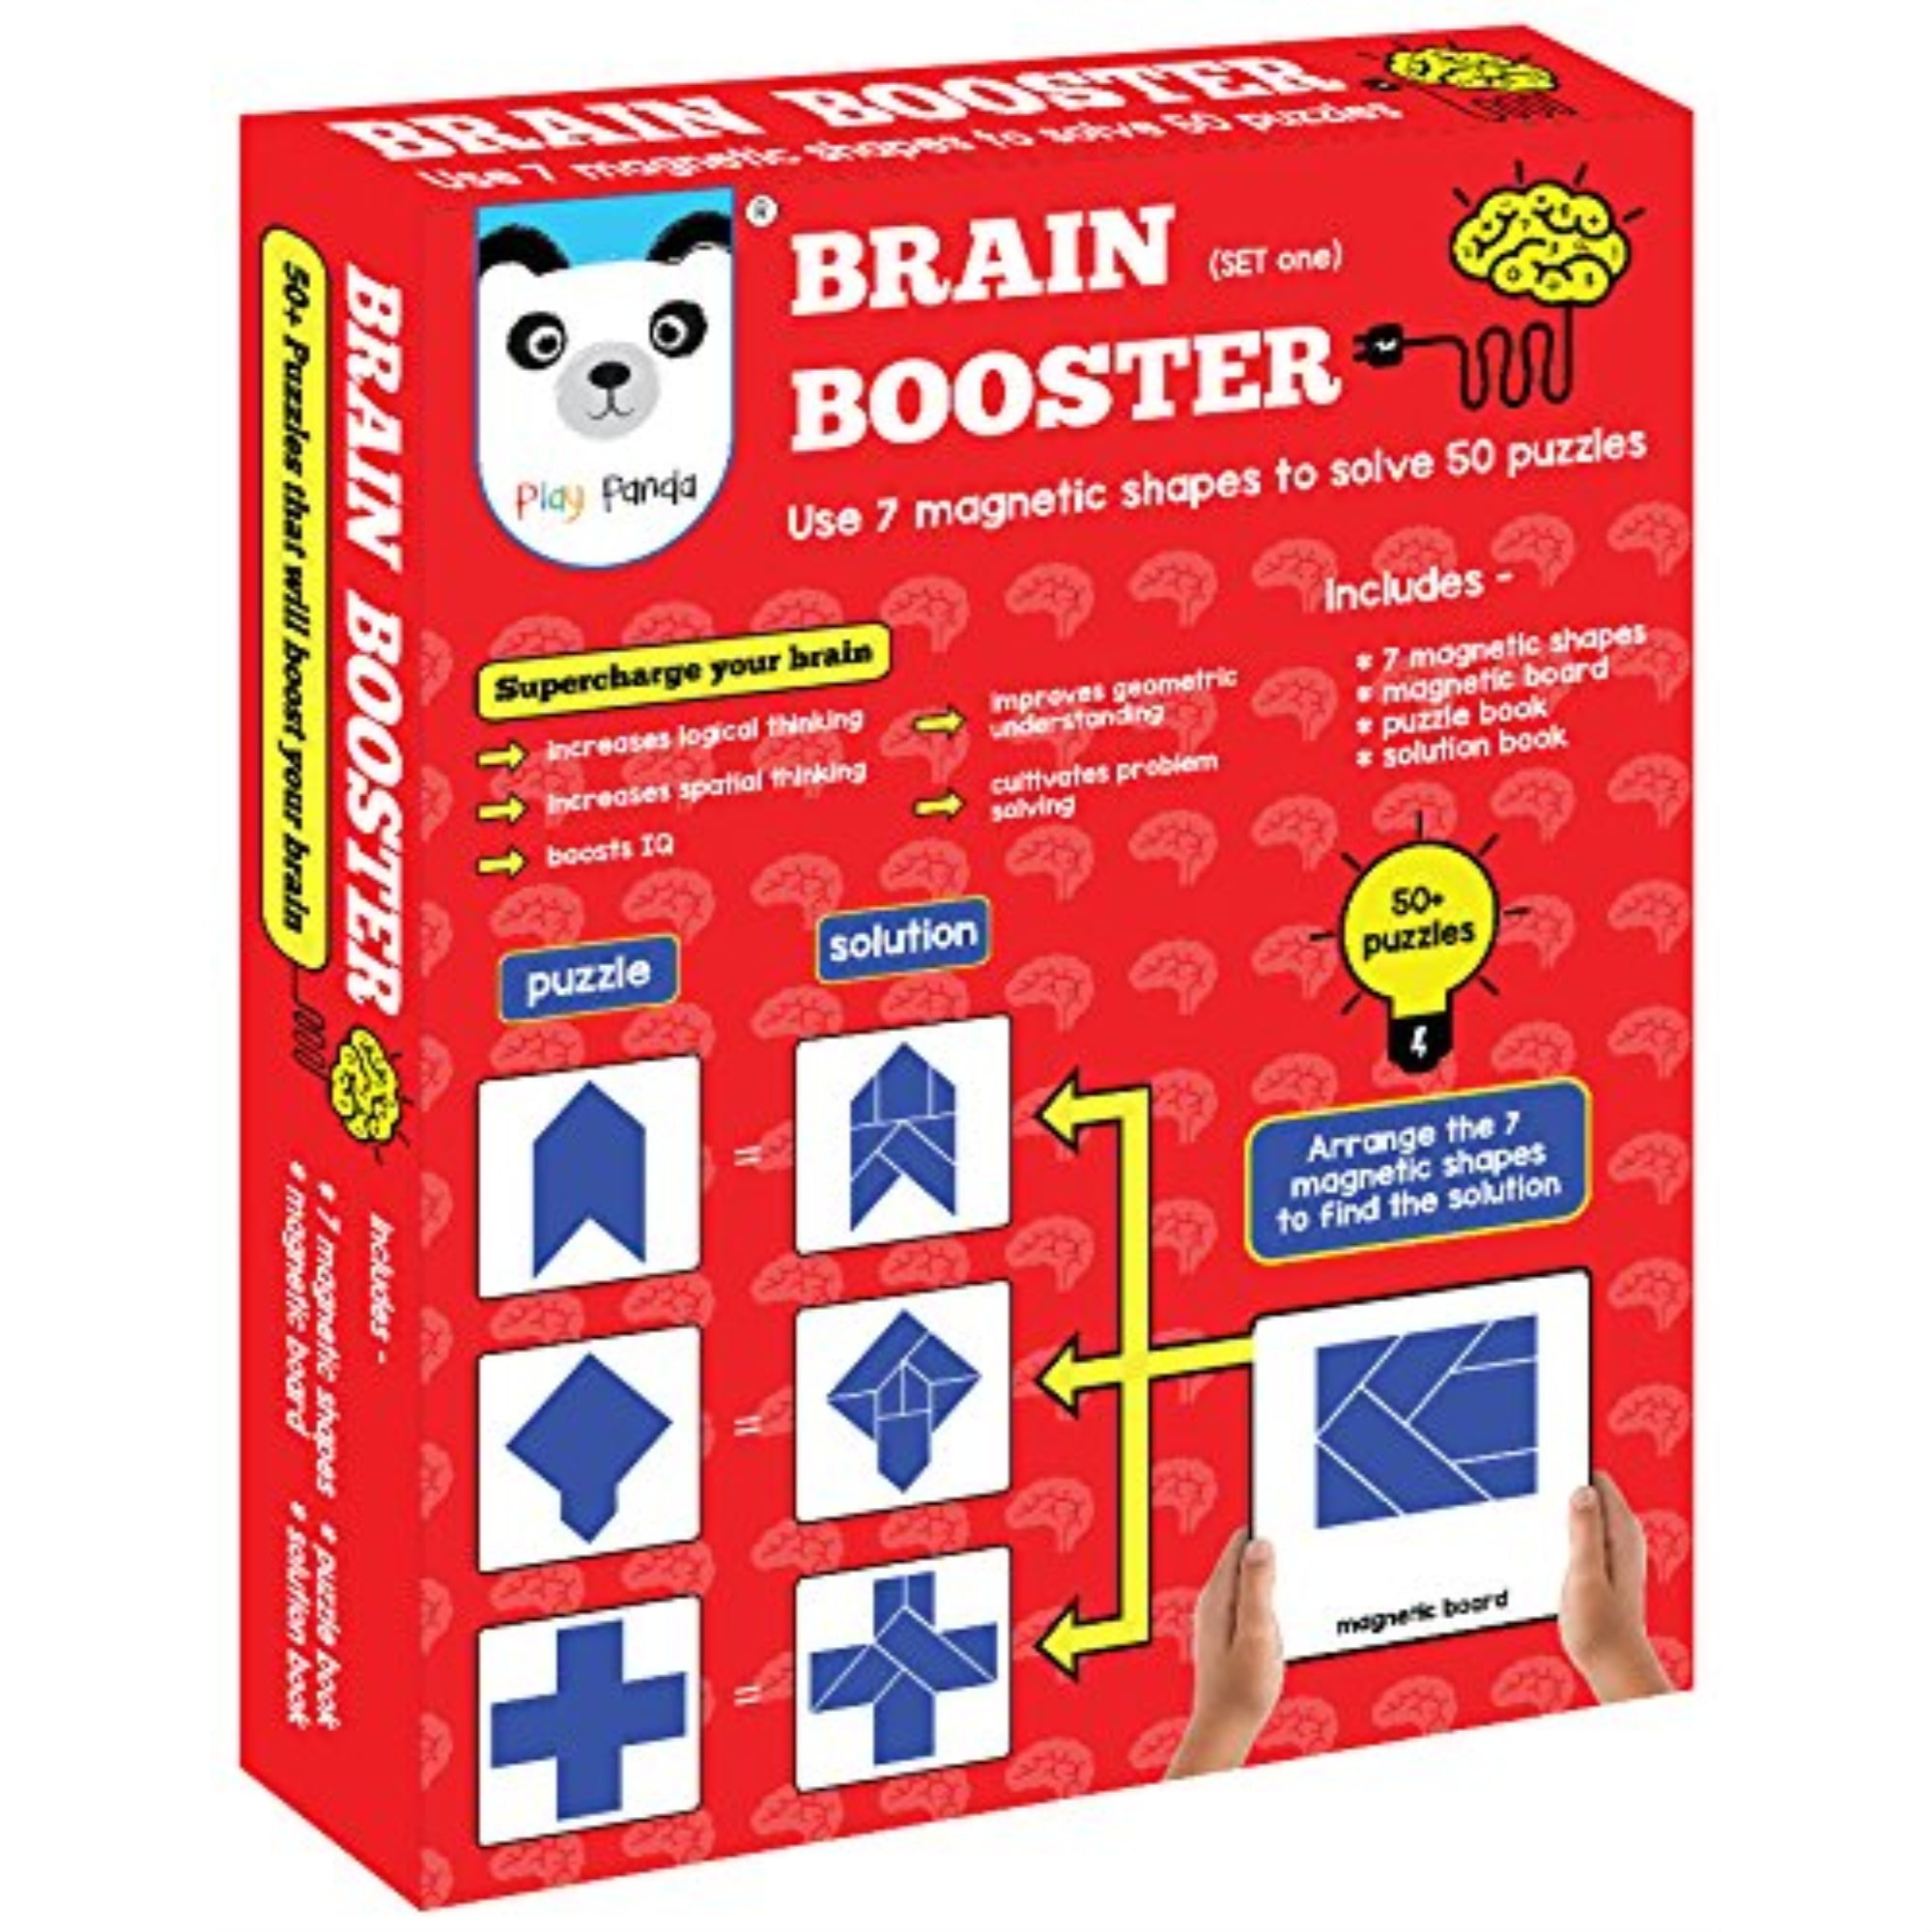 Brain Booster Type 3-56 puzzles designed to boost intelligence puzzle book solution book Play Panda magnetic board with magnetic shapes